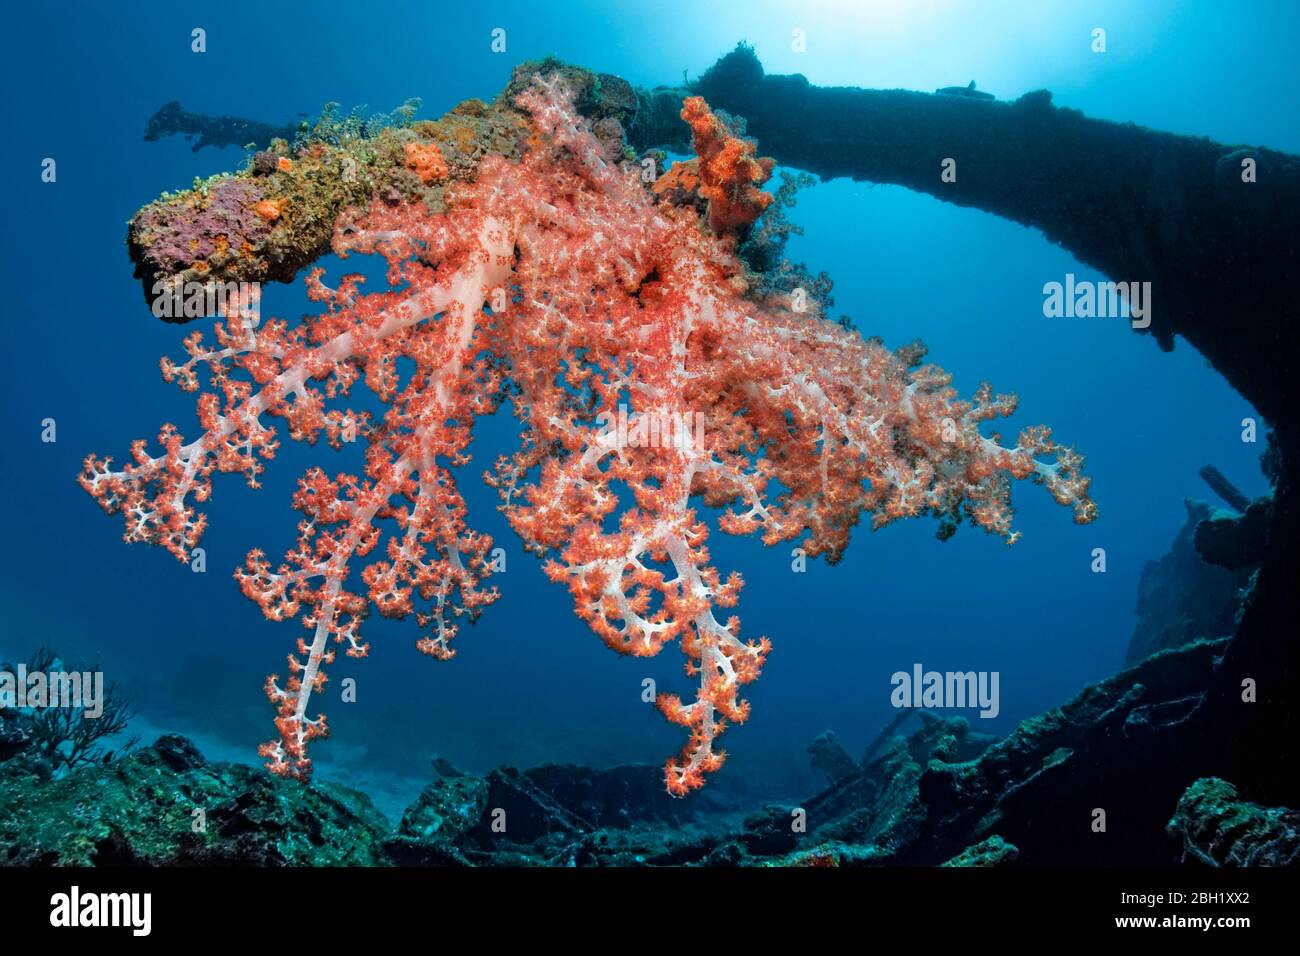 Klunzinger's Soft Coral (Dendronephthya klunzingeri) on mast, back light, Saint Quentin wreck, sunk 1898, Pacific Ocean, South China Sea, Subic Bay Stock Photo